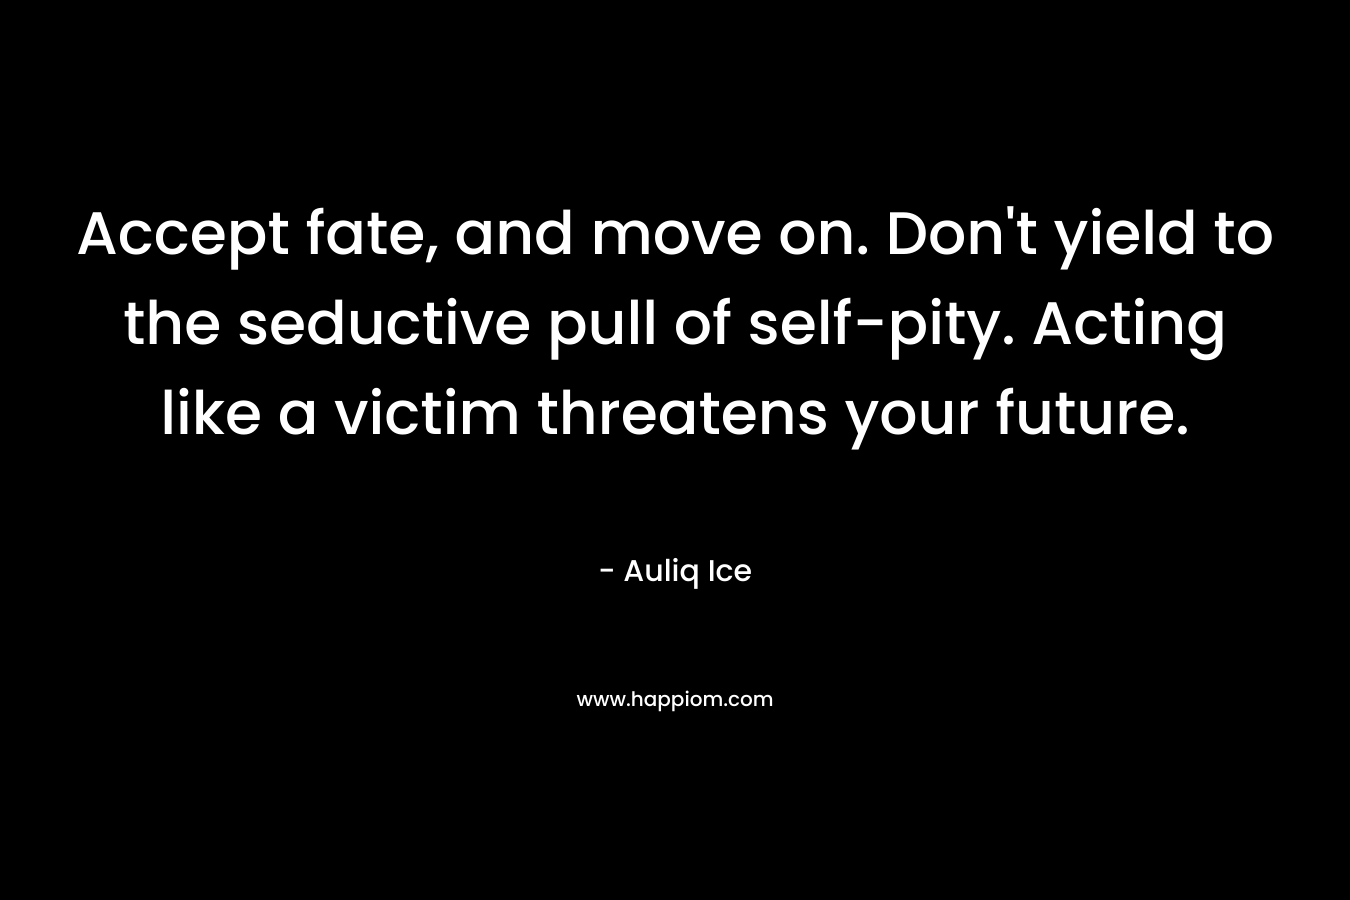 Accept fate, and move on. Don’t yield to the seductive pull of self-pity. Acting like a victim threatens your future. – Auliq Ice